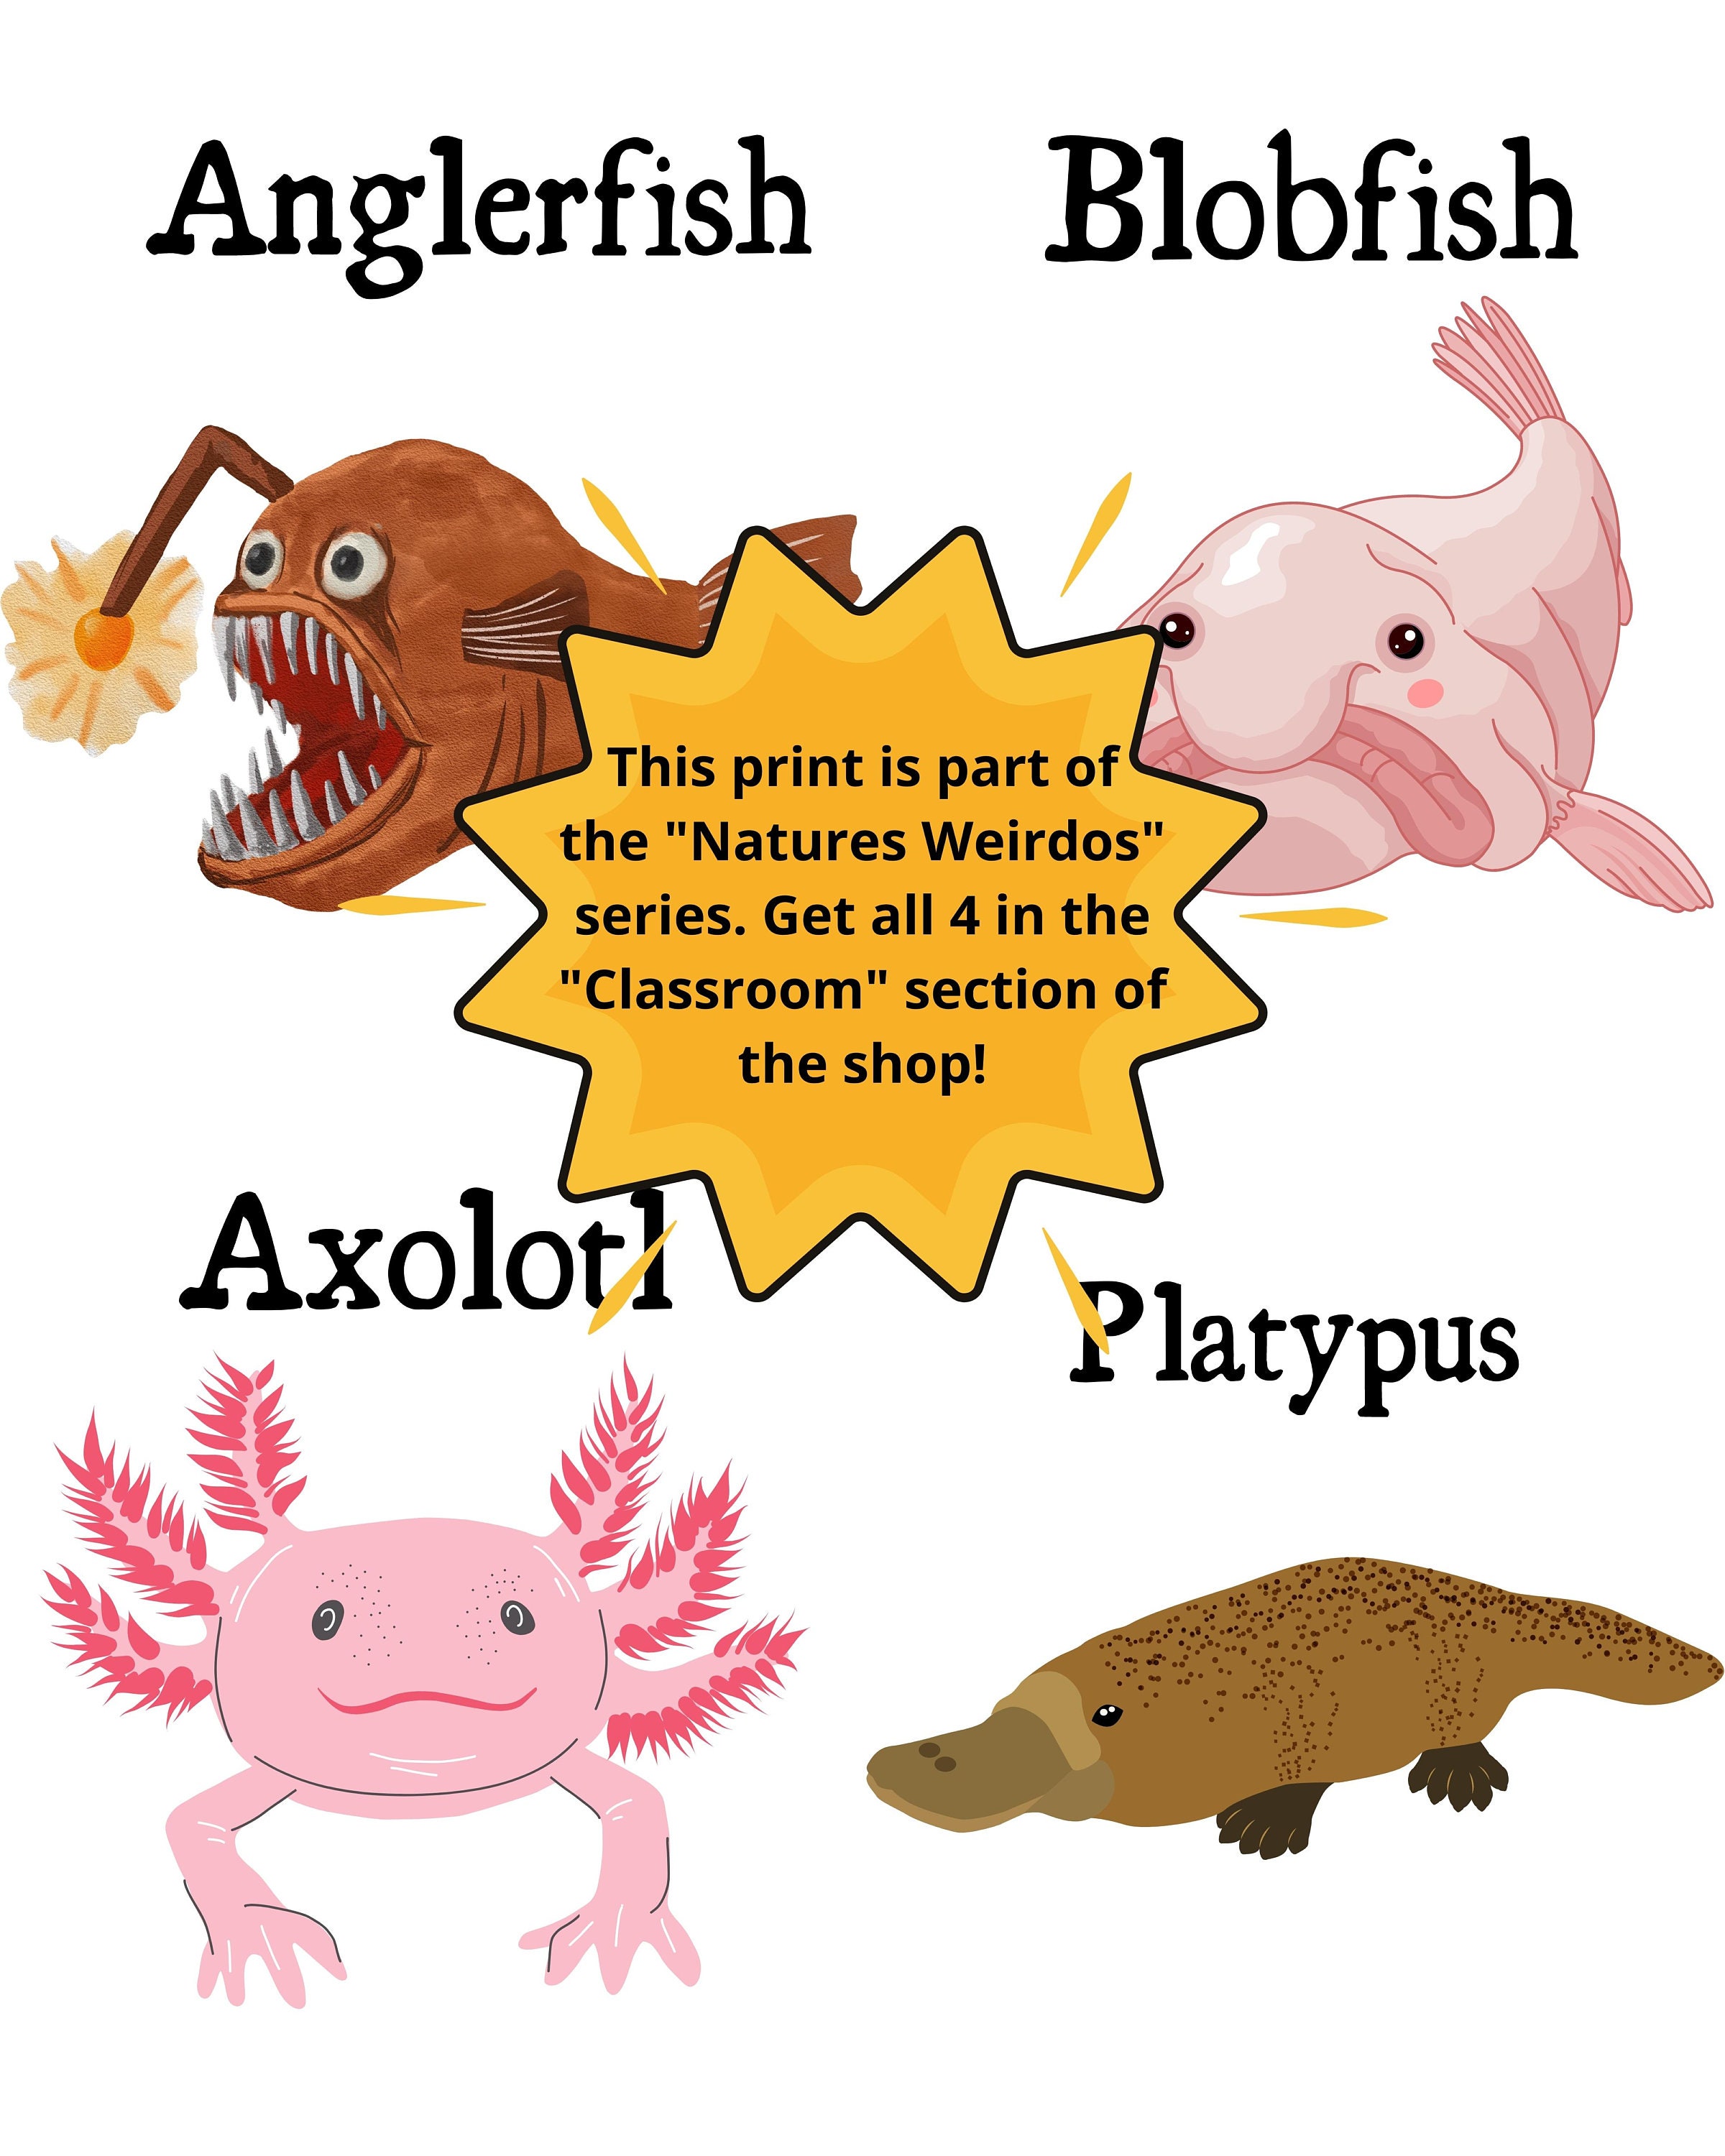 Impurest's Guide to Animals #53 - Blobfish